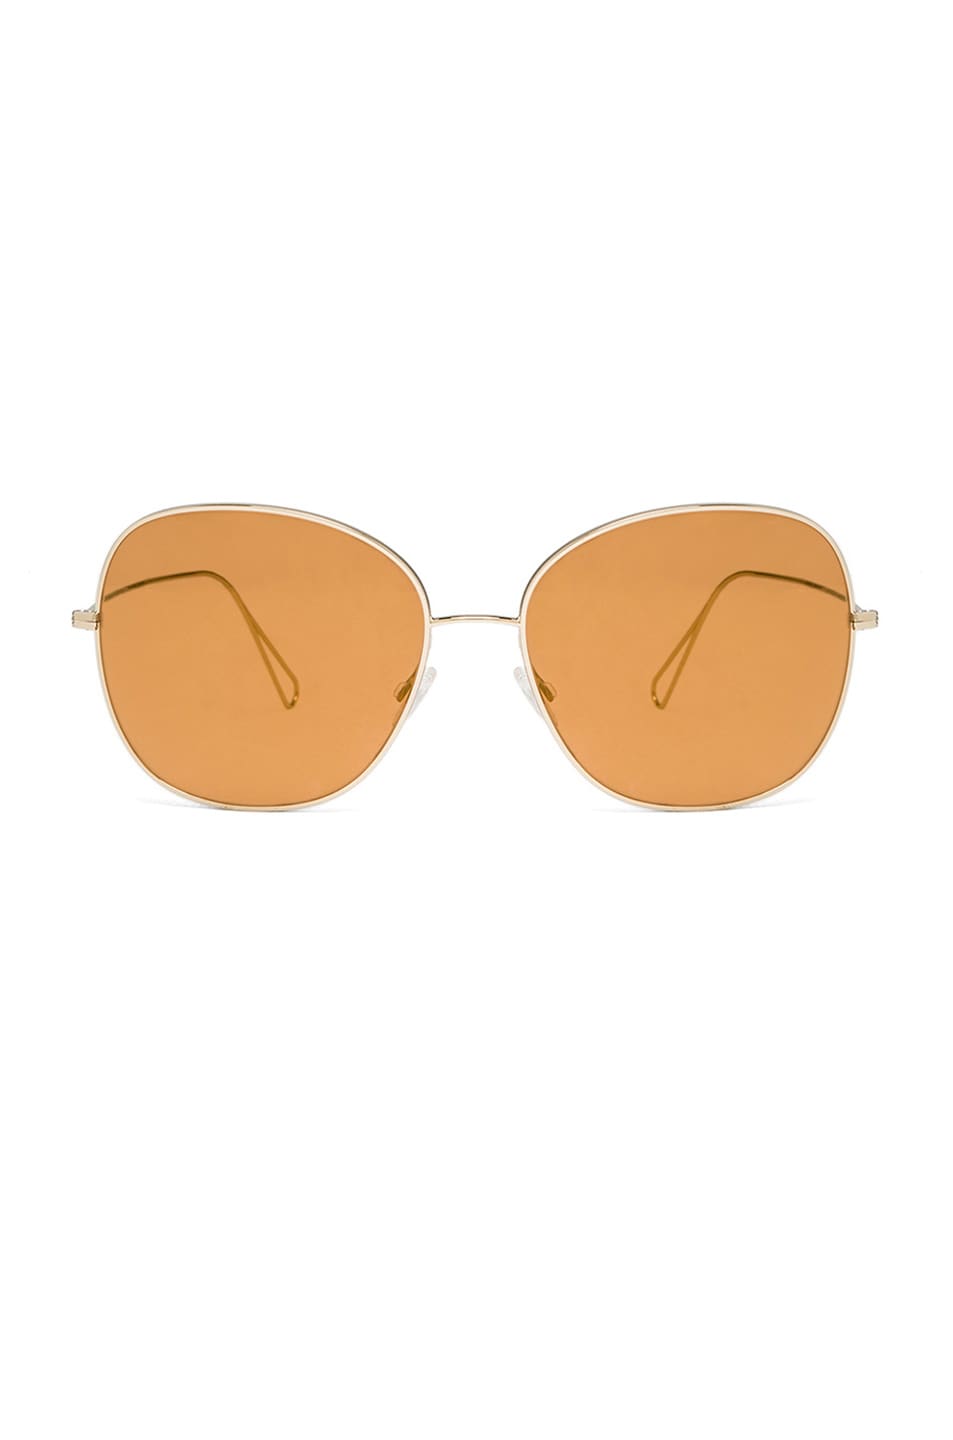 Image 1 of Oliver Peoples x Isabel Marant Daria Sunglasses in Light Gold & Peach Mirror